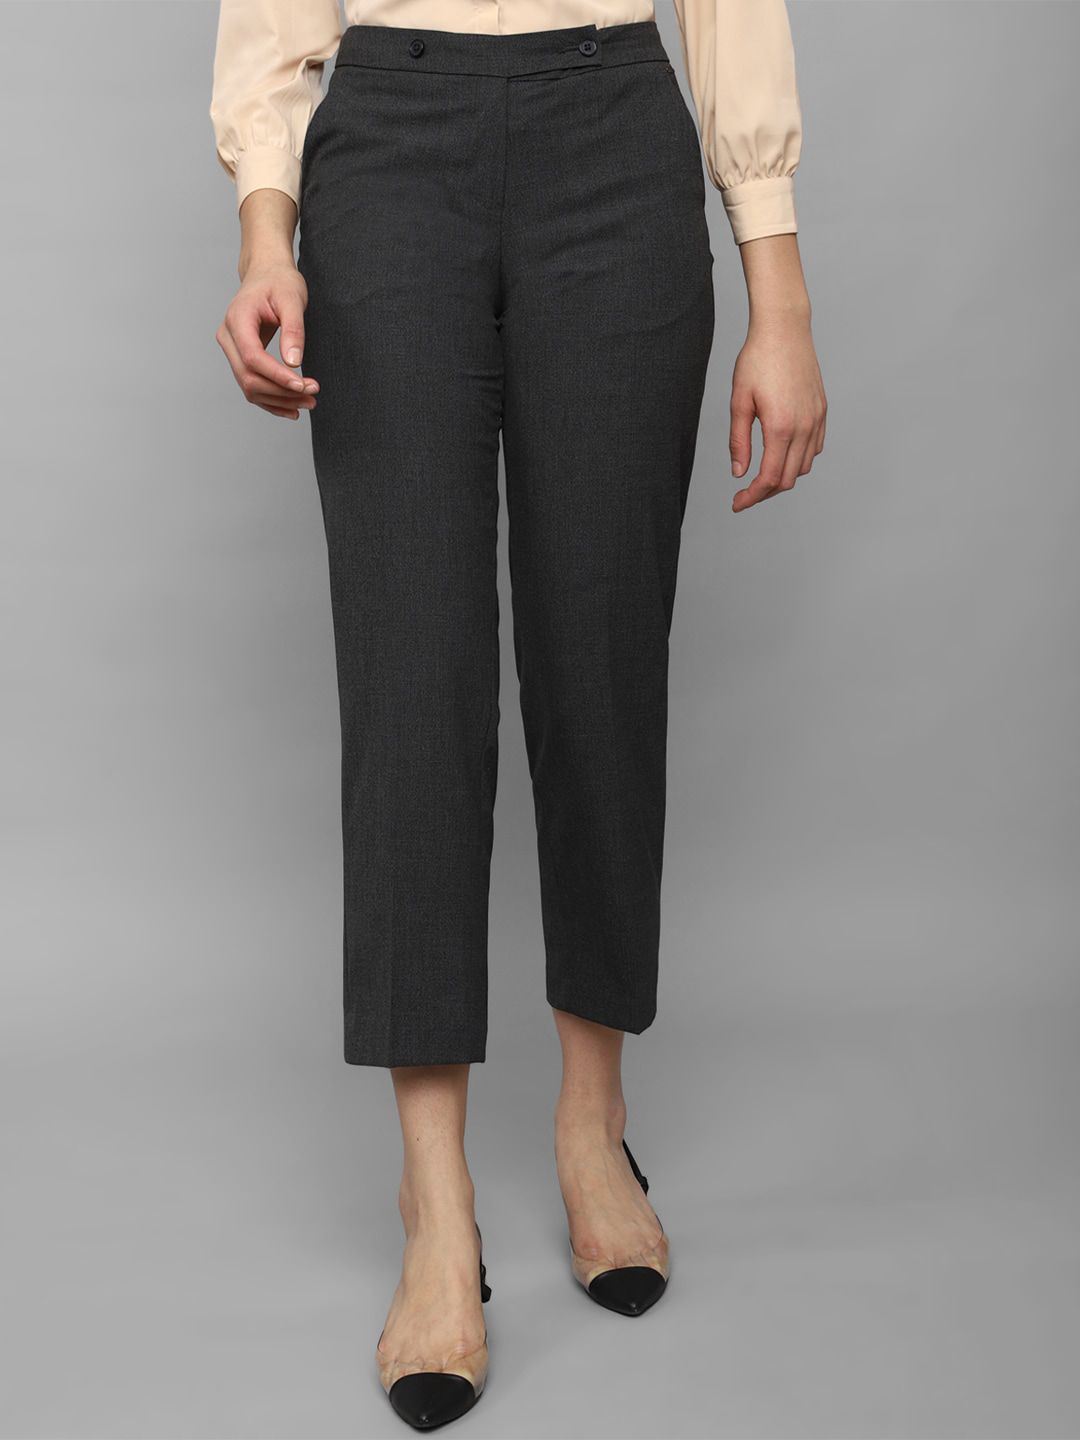 Allen Solly Woman Mid-Rise Regular Fit Cropped Formal Trousers Price in India